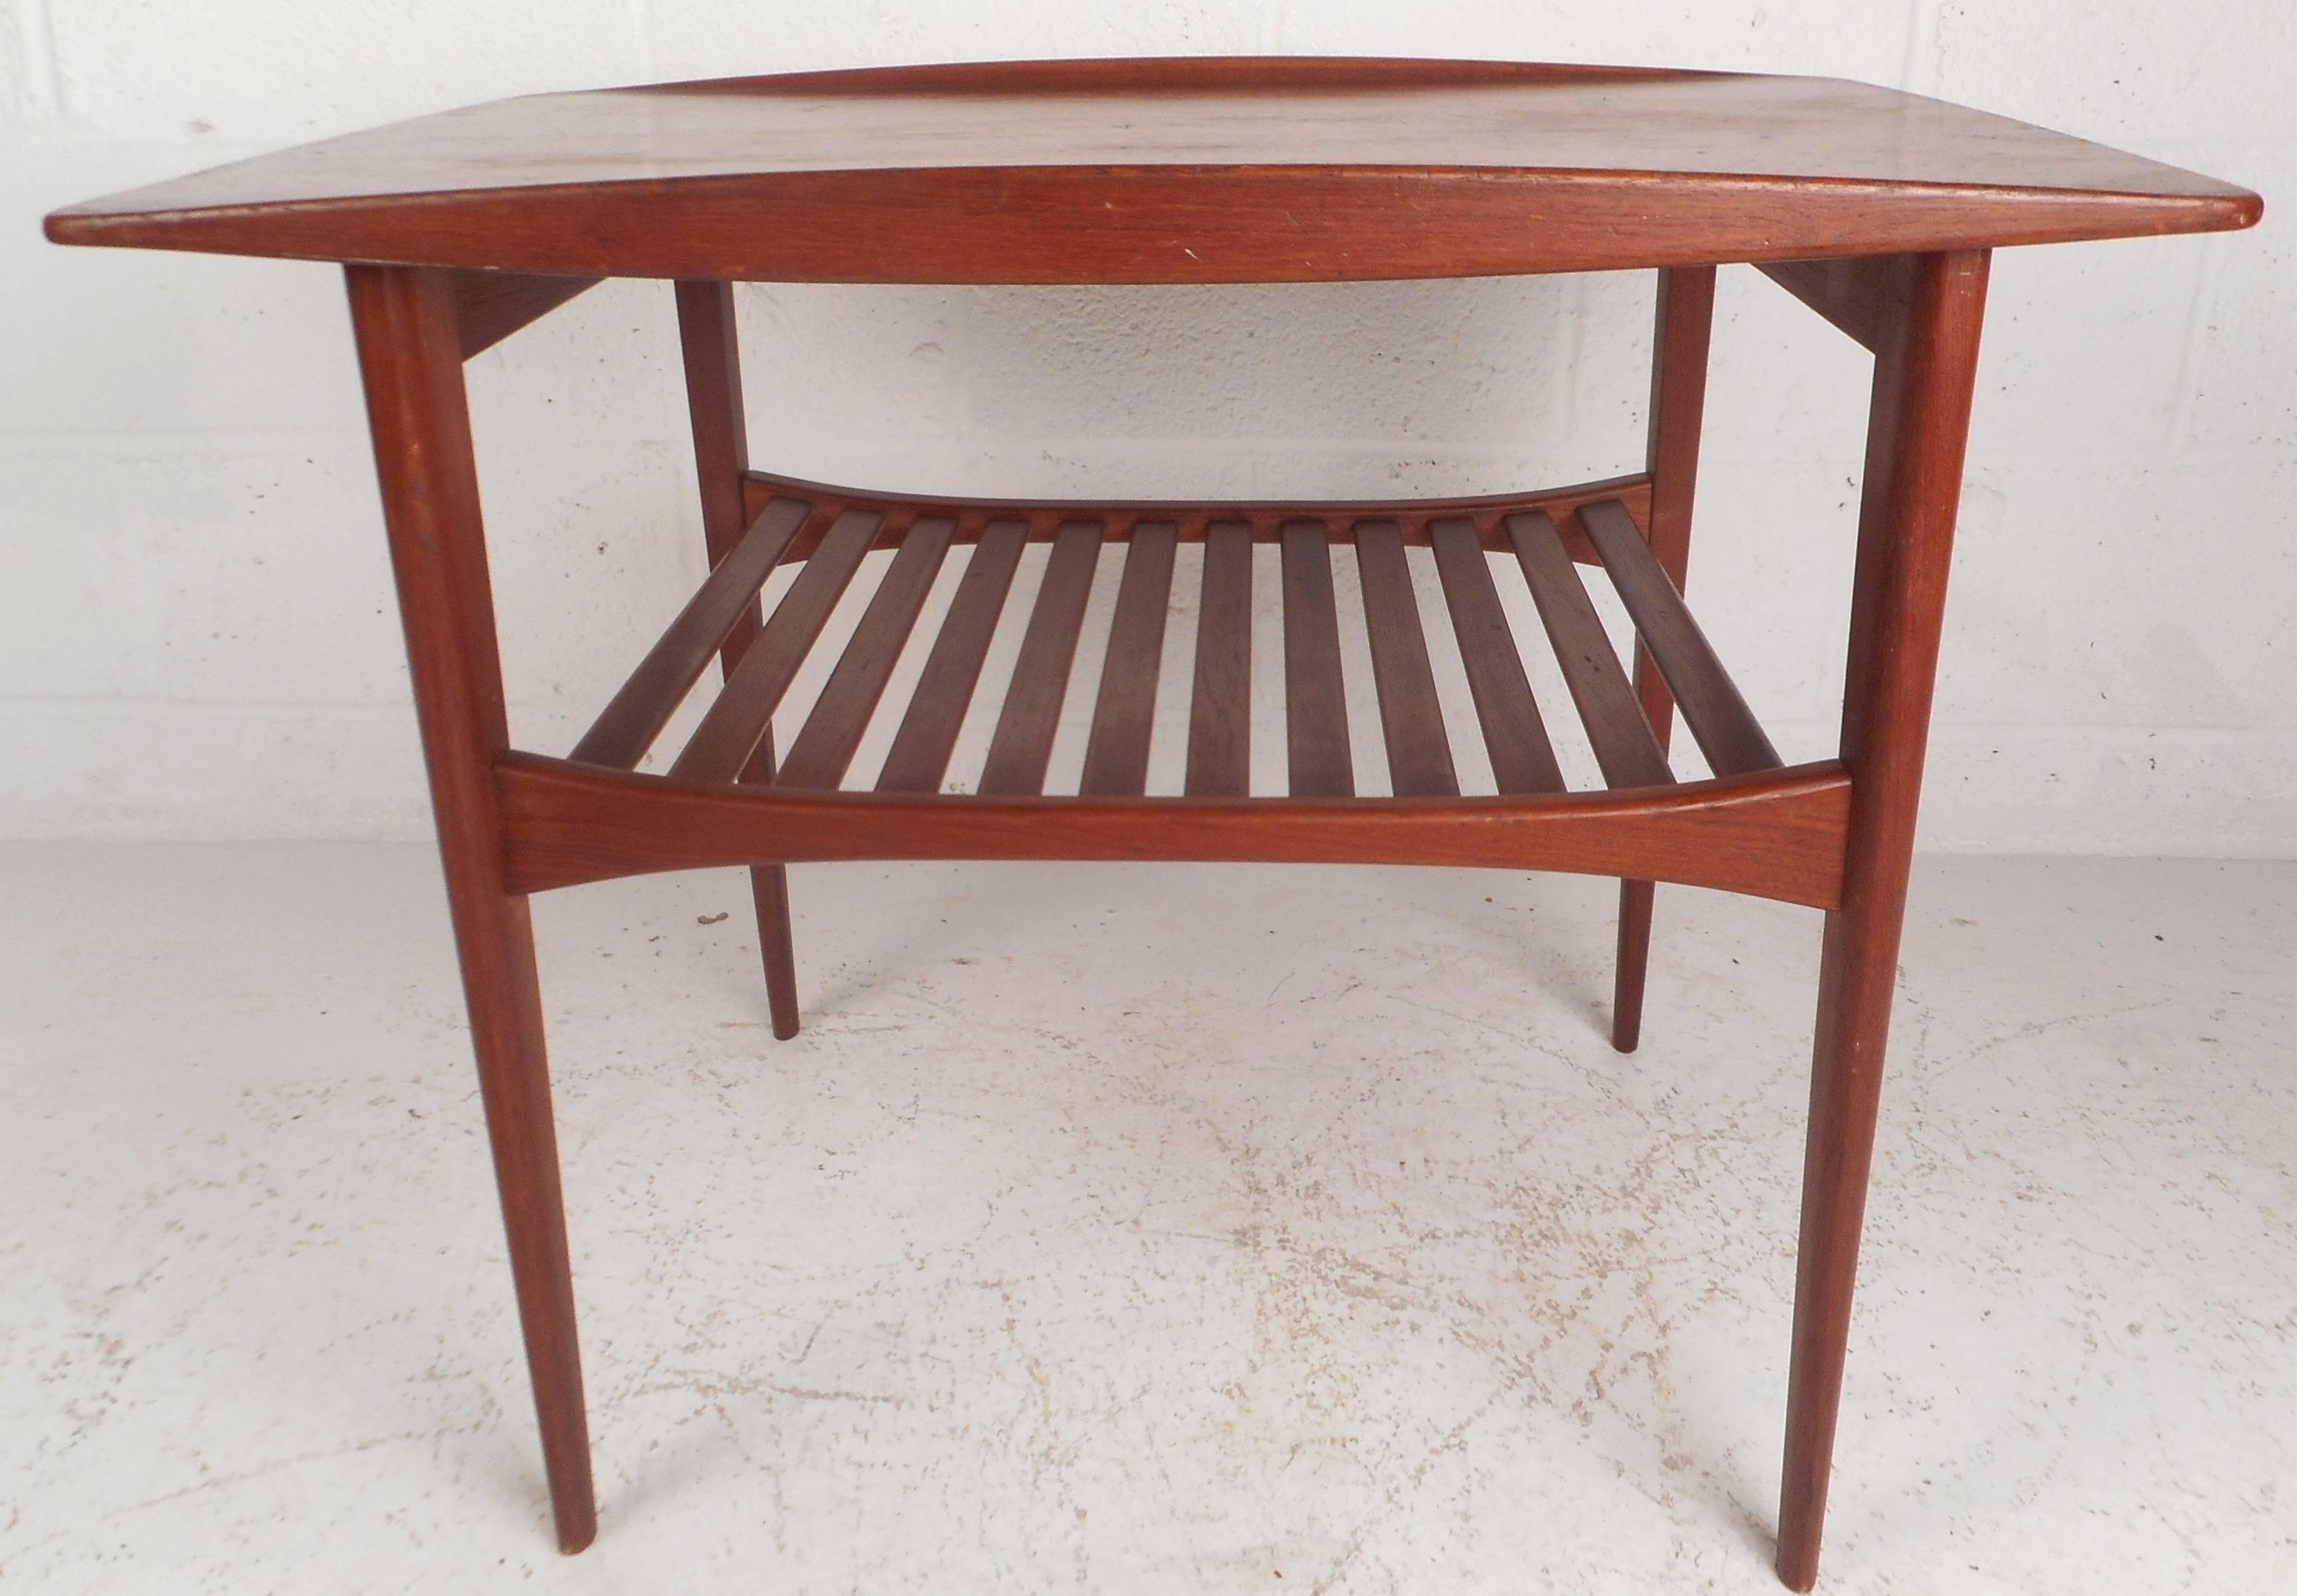 This beautiful vintage modern end table features two tiers for storage and stylish tapered legs. The sleek design has unique raised edges on the top and a slatted lower tier. Quality construction with elegant teak wood grain makes this Mid-Century